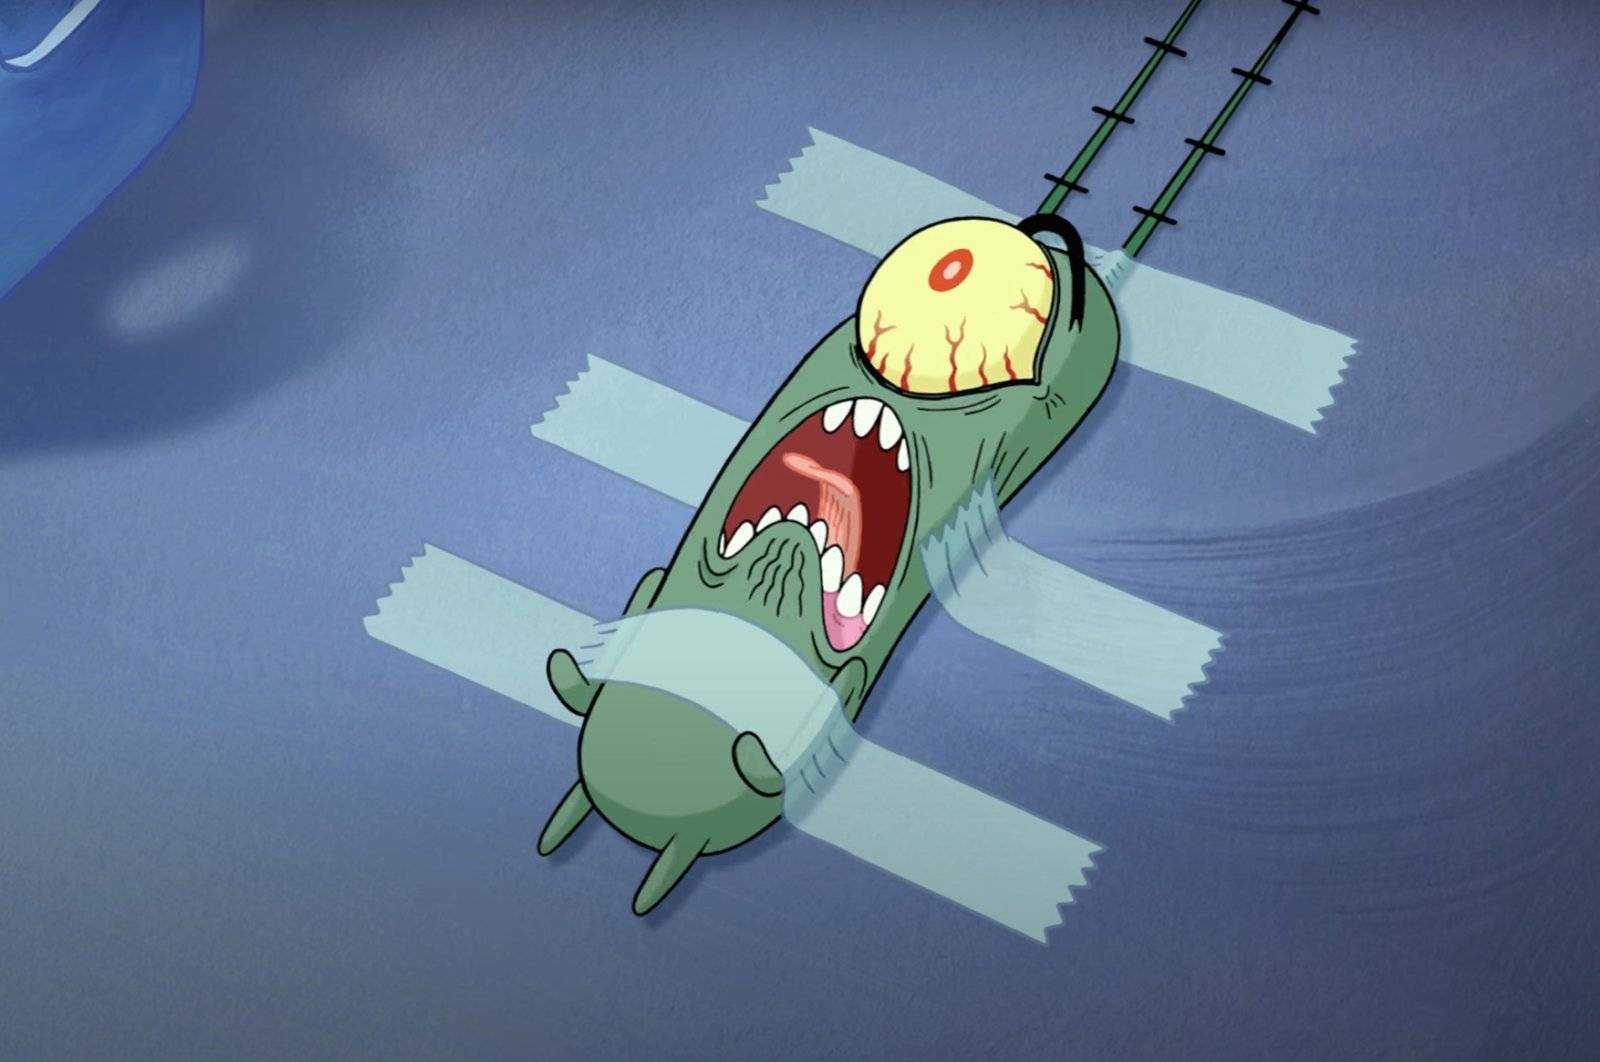 The character Plankton, in a still shot from the animated film, "The SpongeBob Movie: Sponge Out of Water." (Screenshot via Paramount Pictures International YouTube Channel)